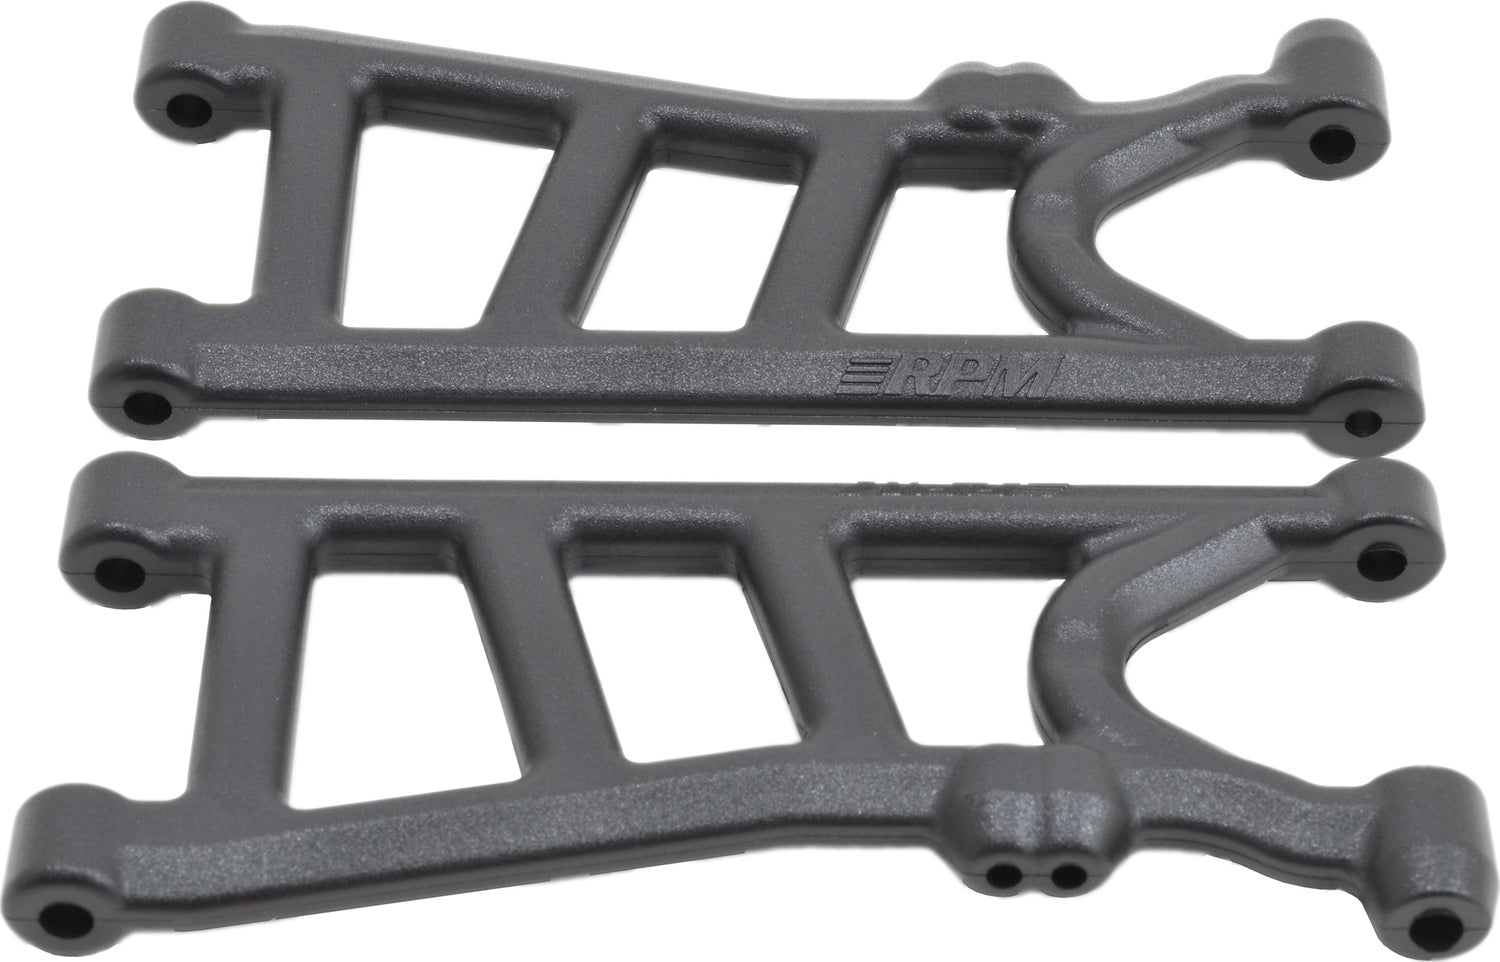 Rear Arms for ARRMA Typhon 4x4 3S BLX